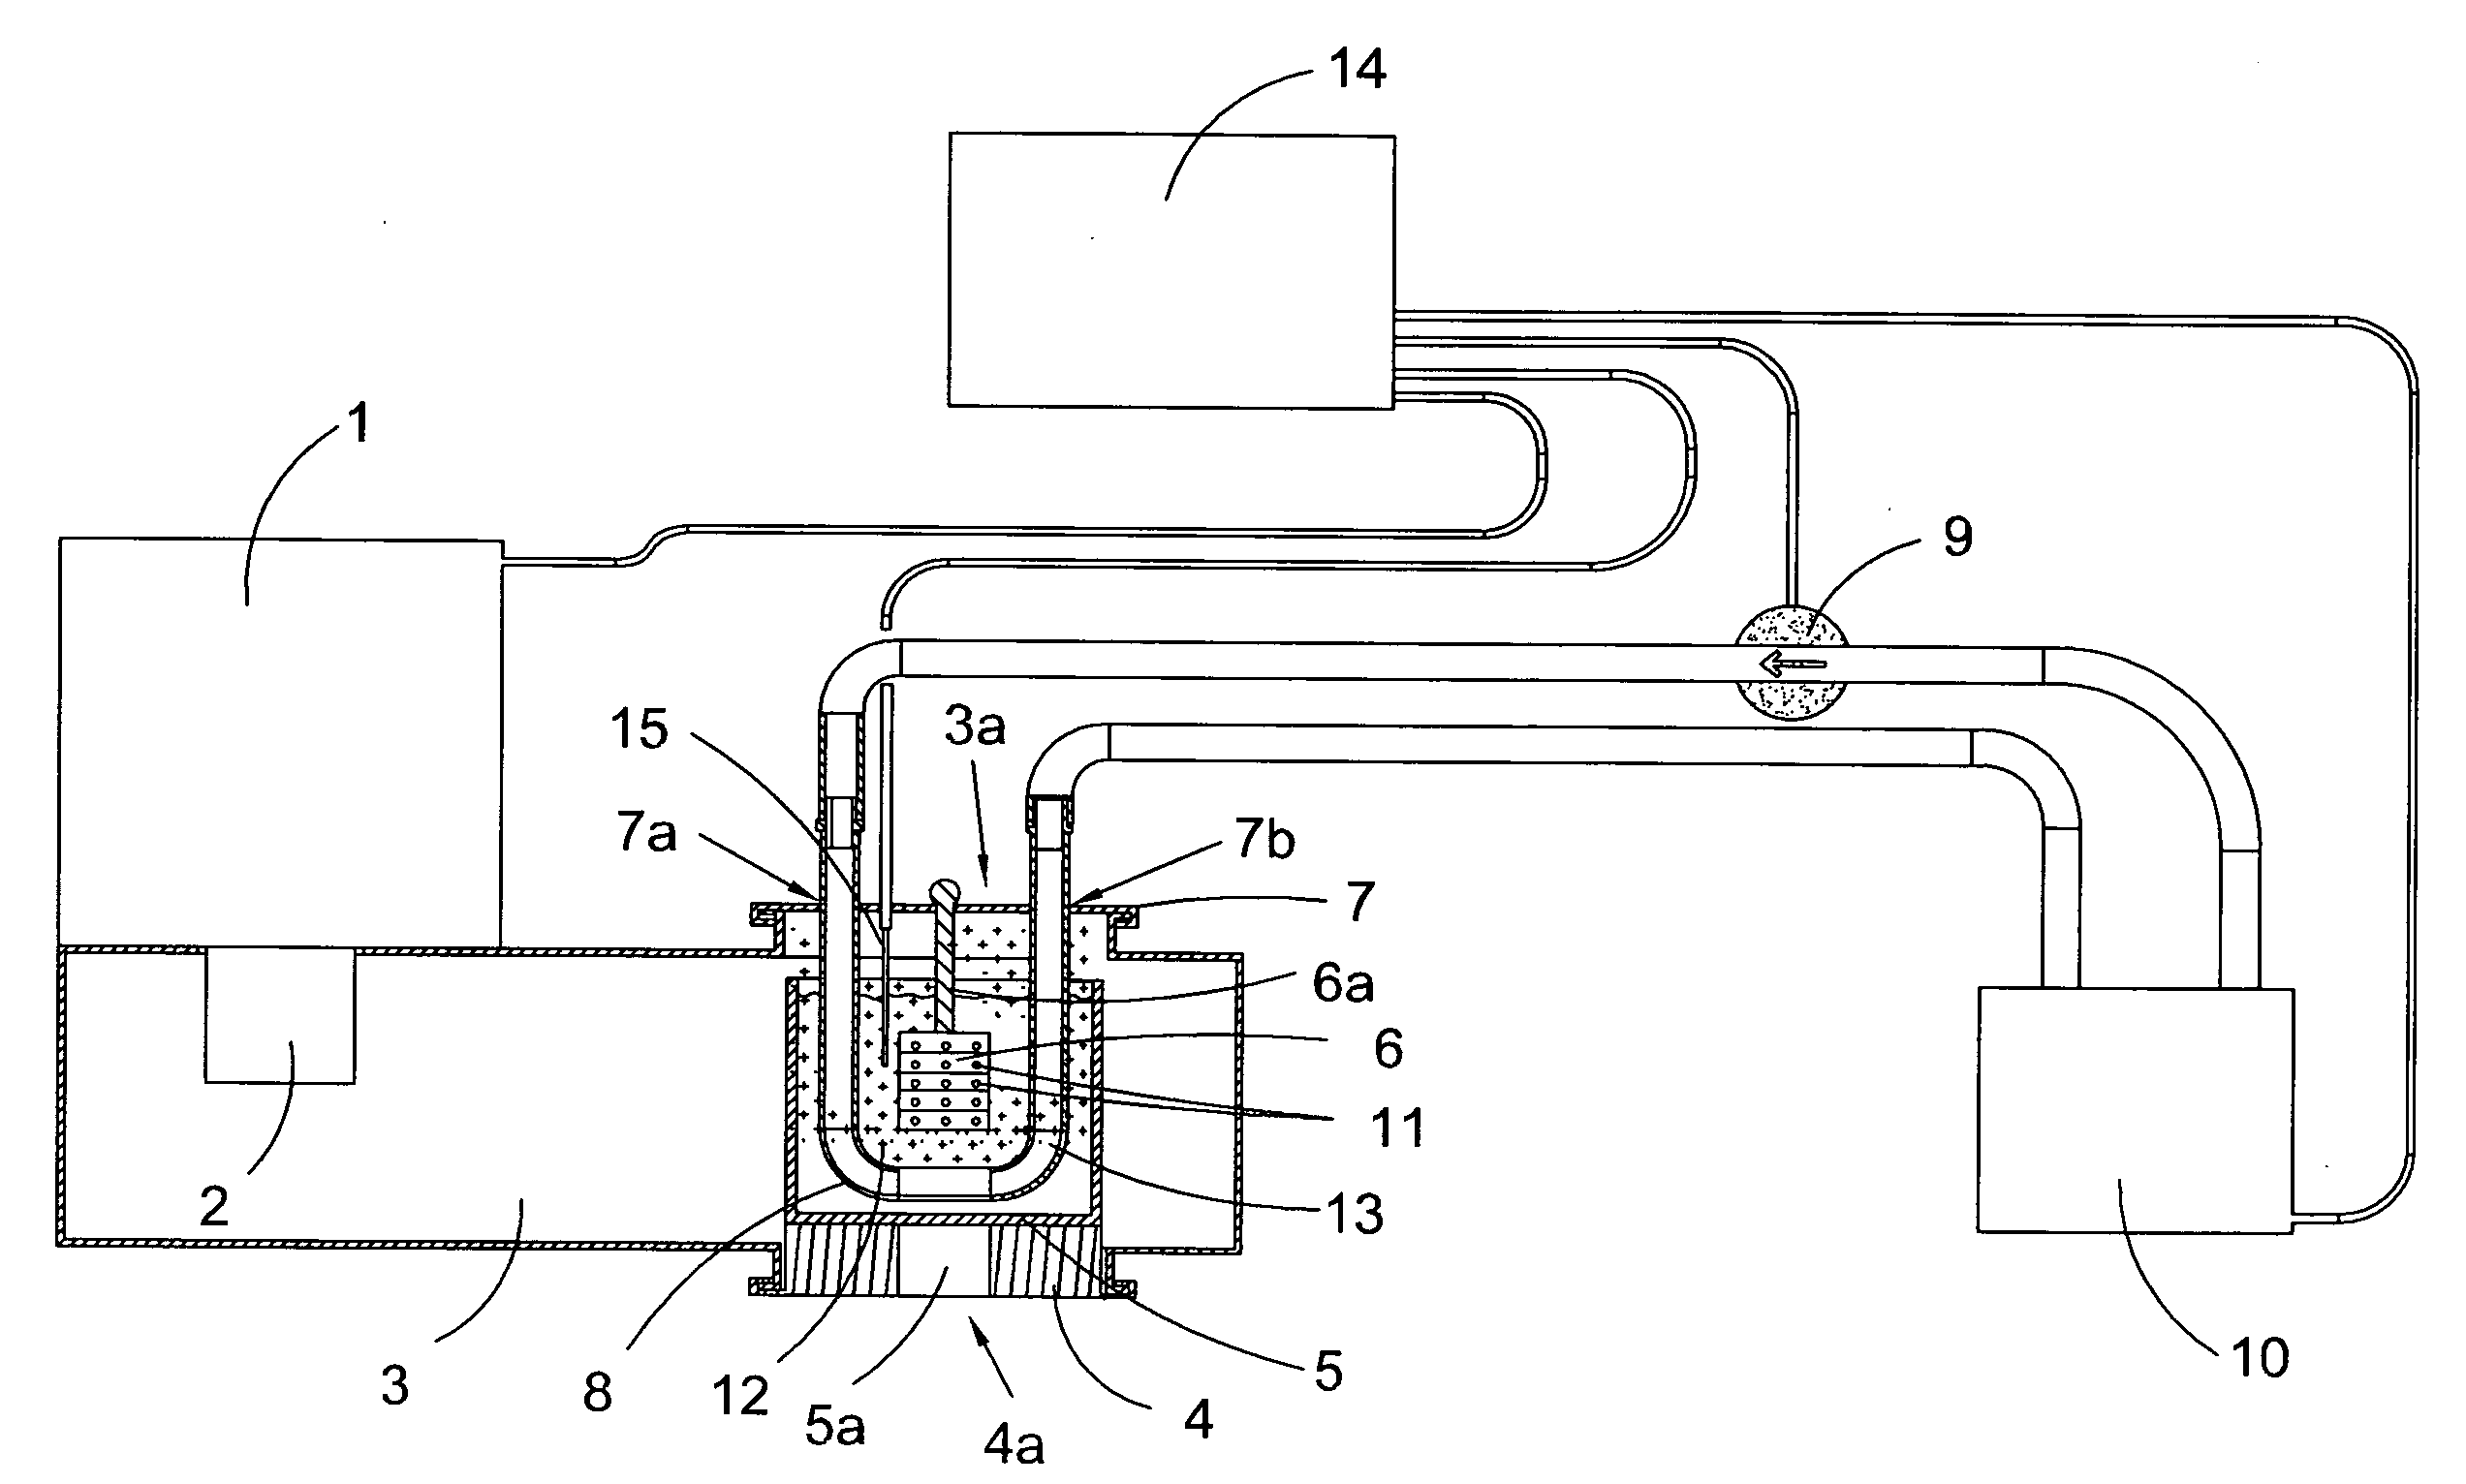 Apparatus for microwave-assisted specimen preparation